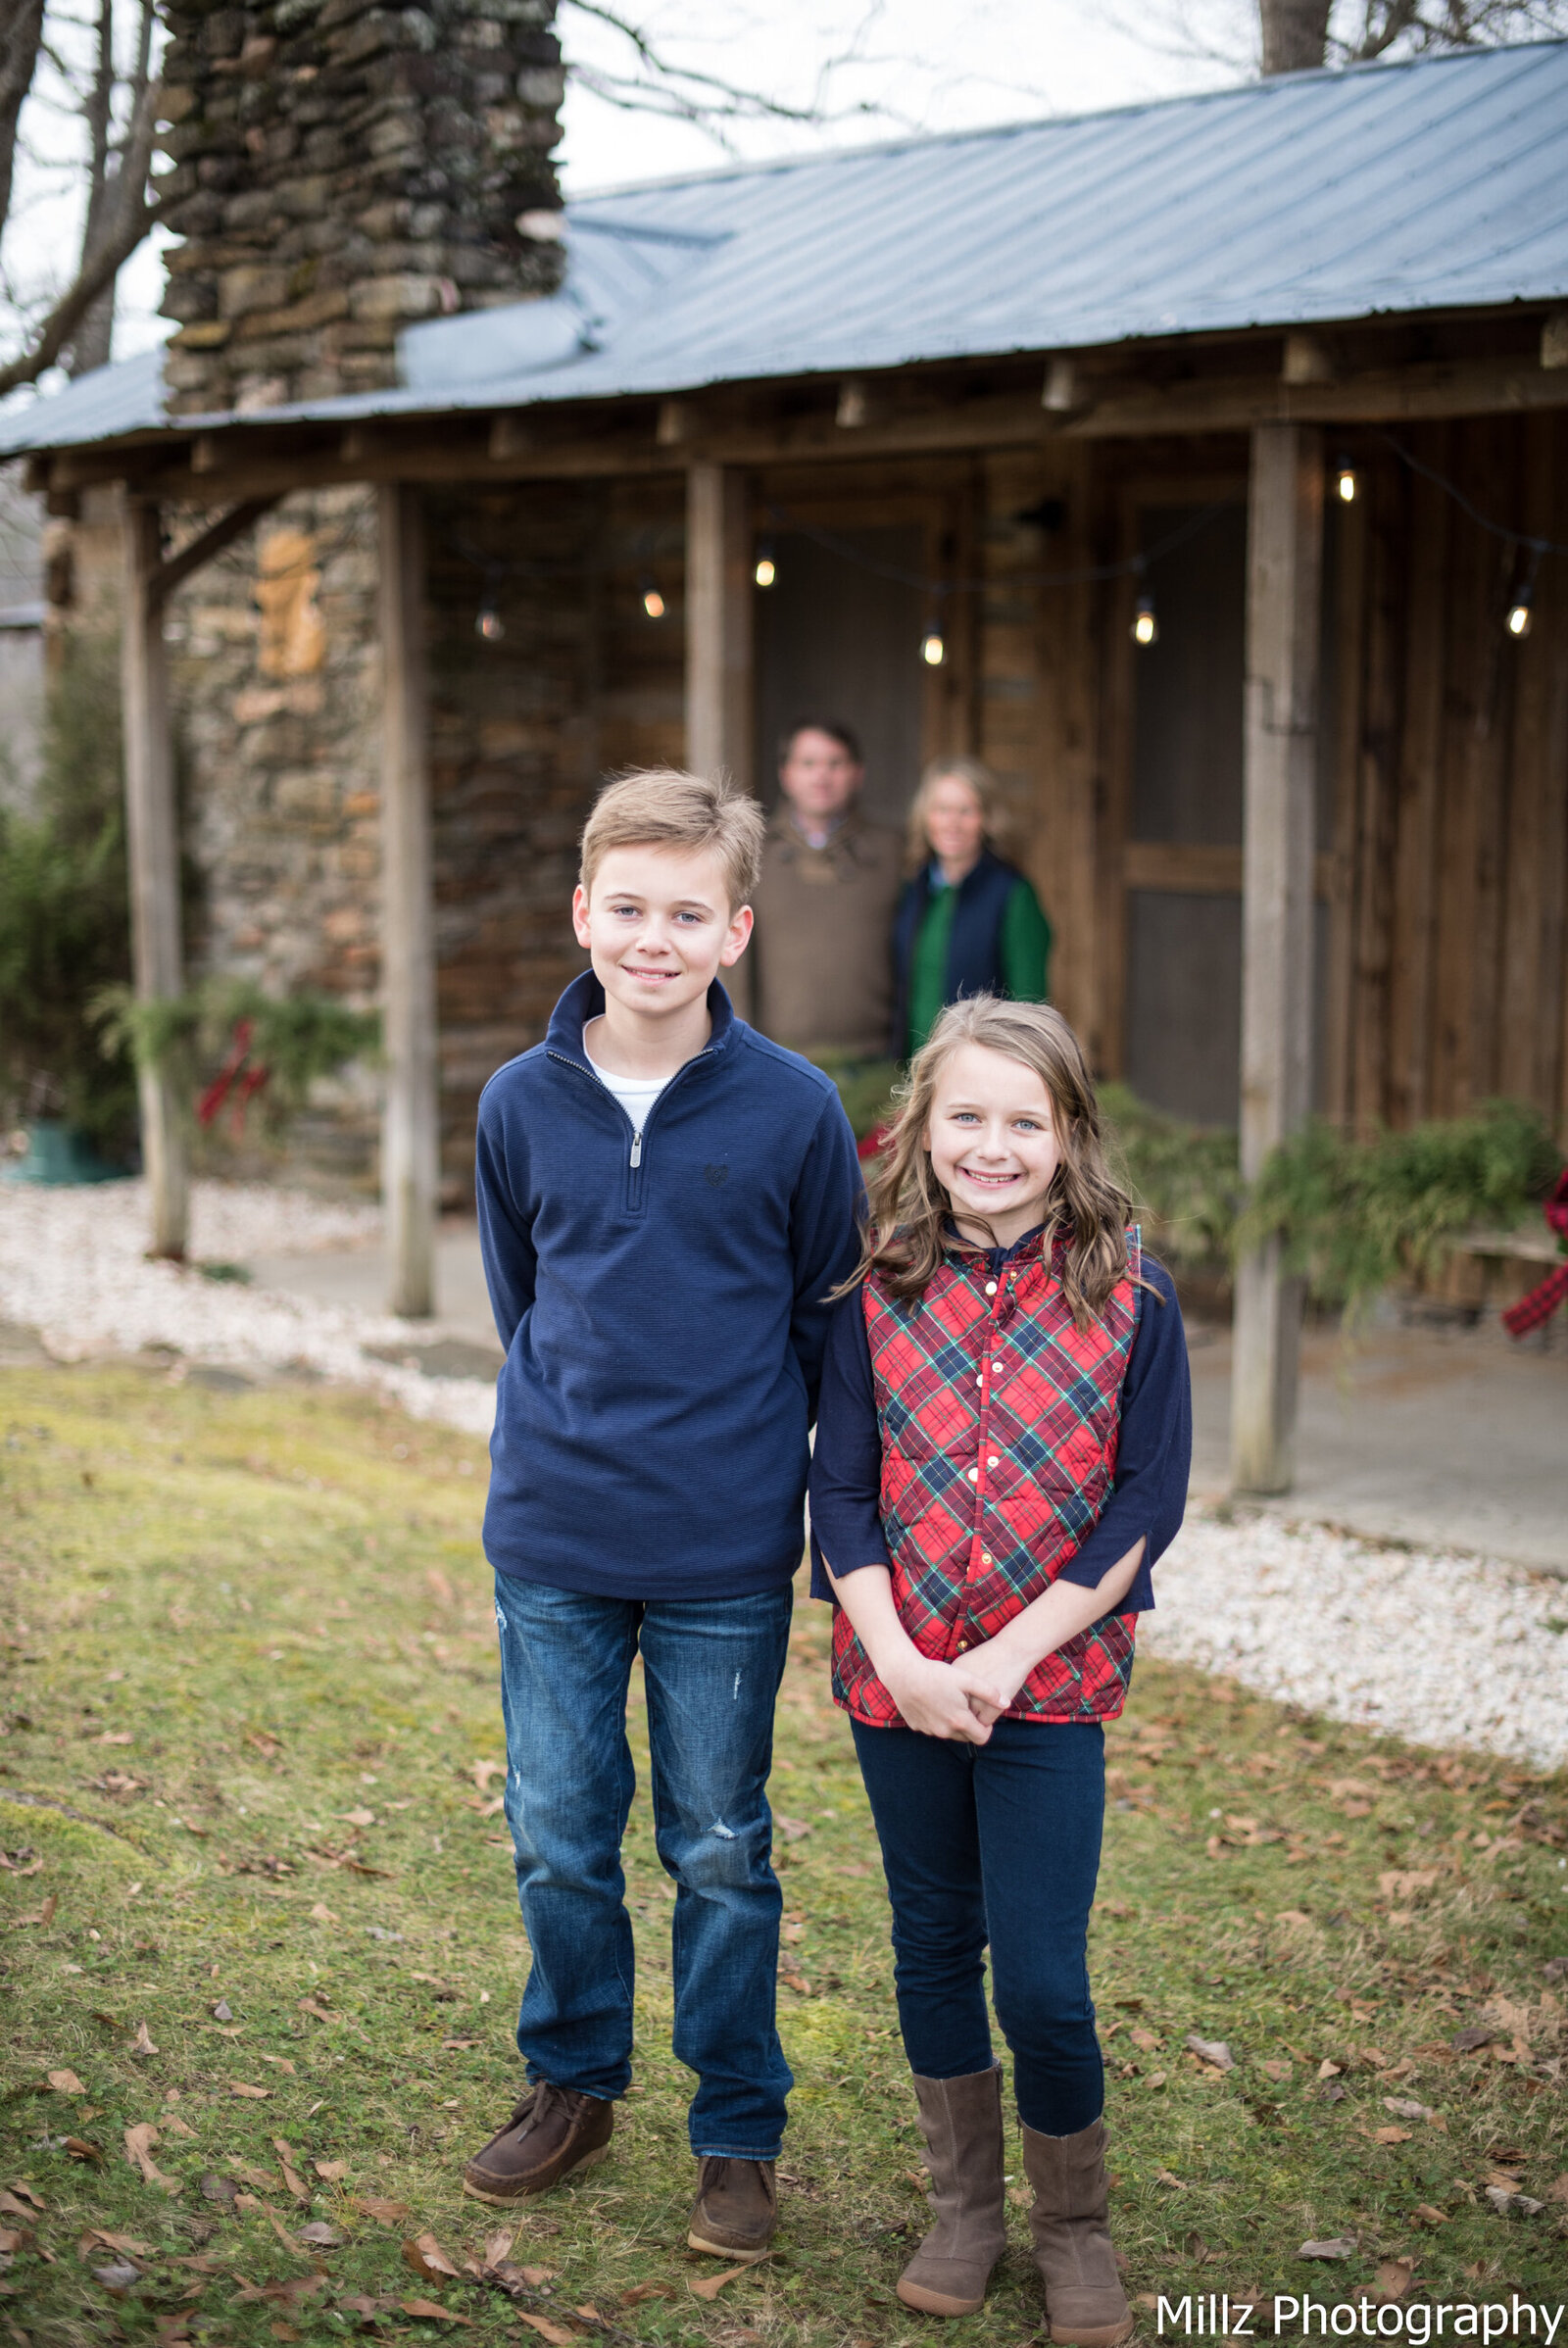 a brother and sister standing in front of a house smiling at the camera while their parents watch from the background photographed by Millz Photography in Greenville, SC